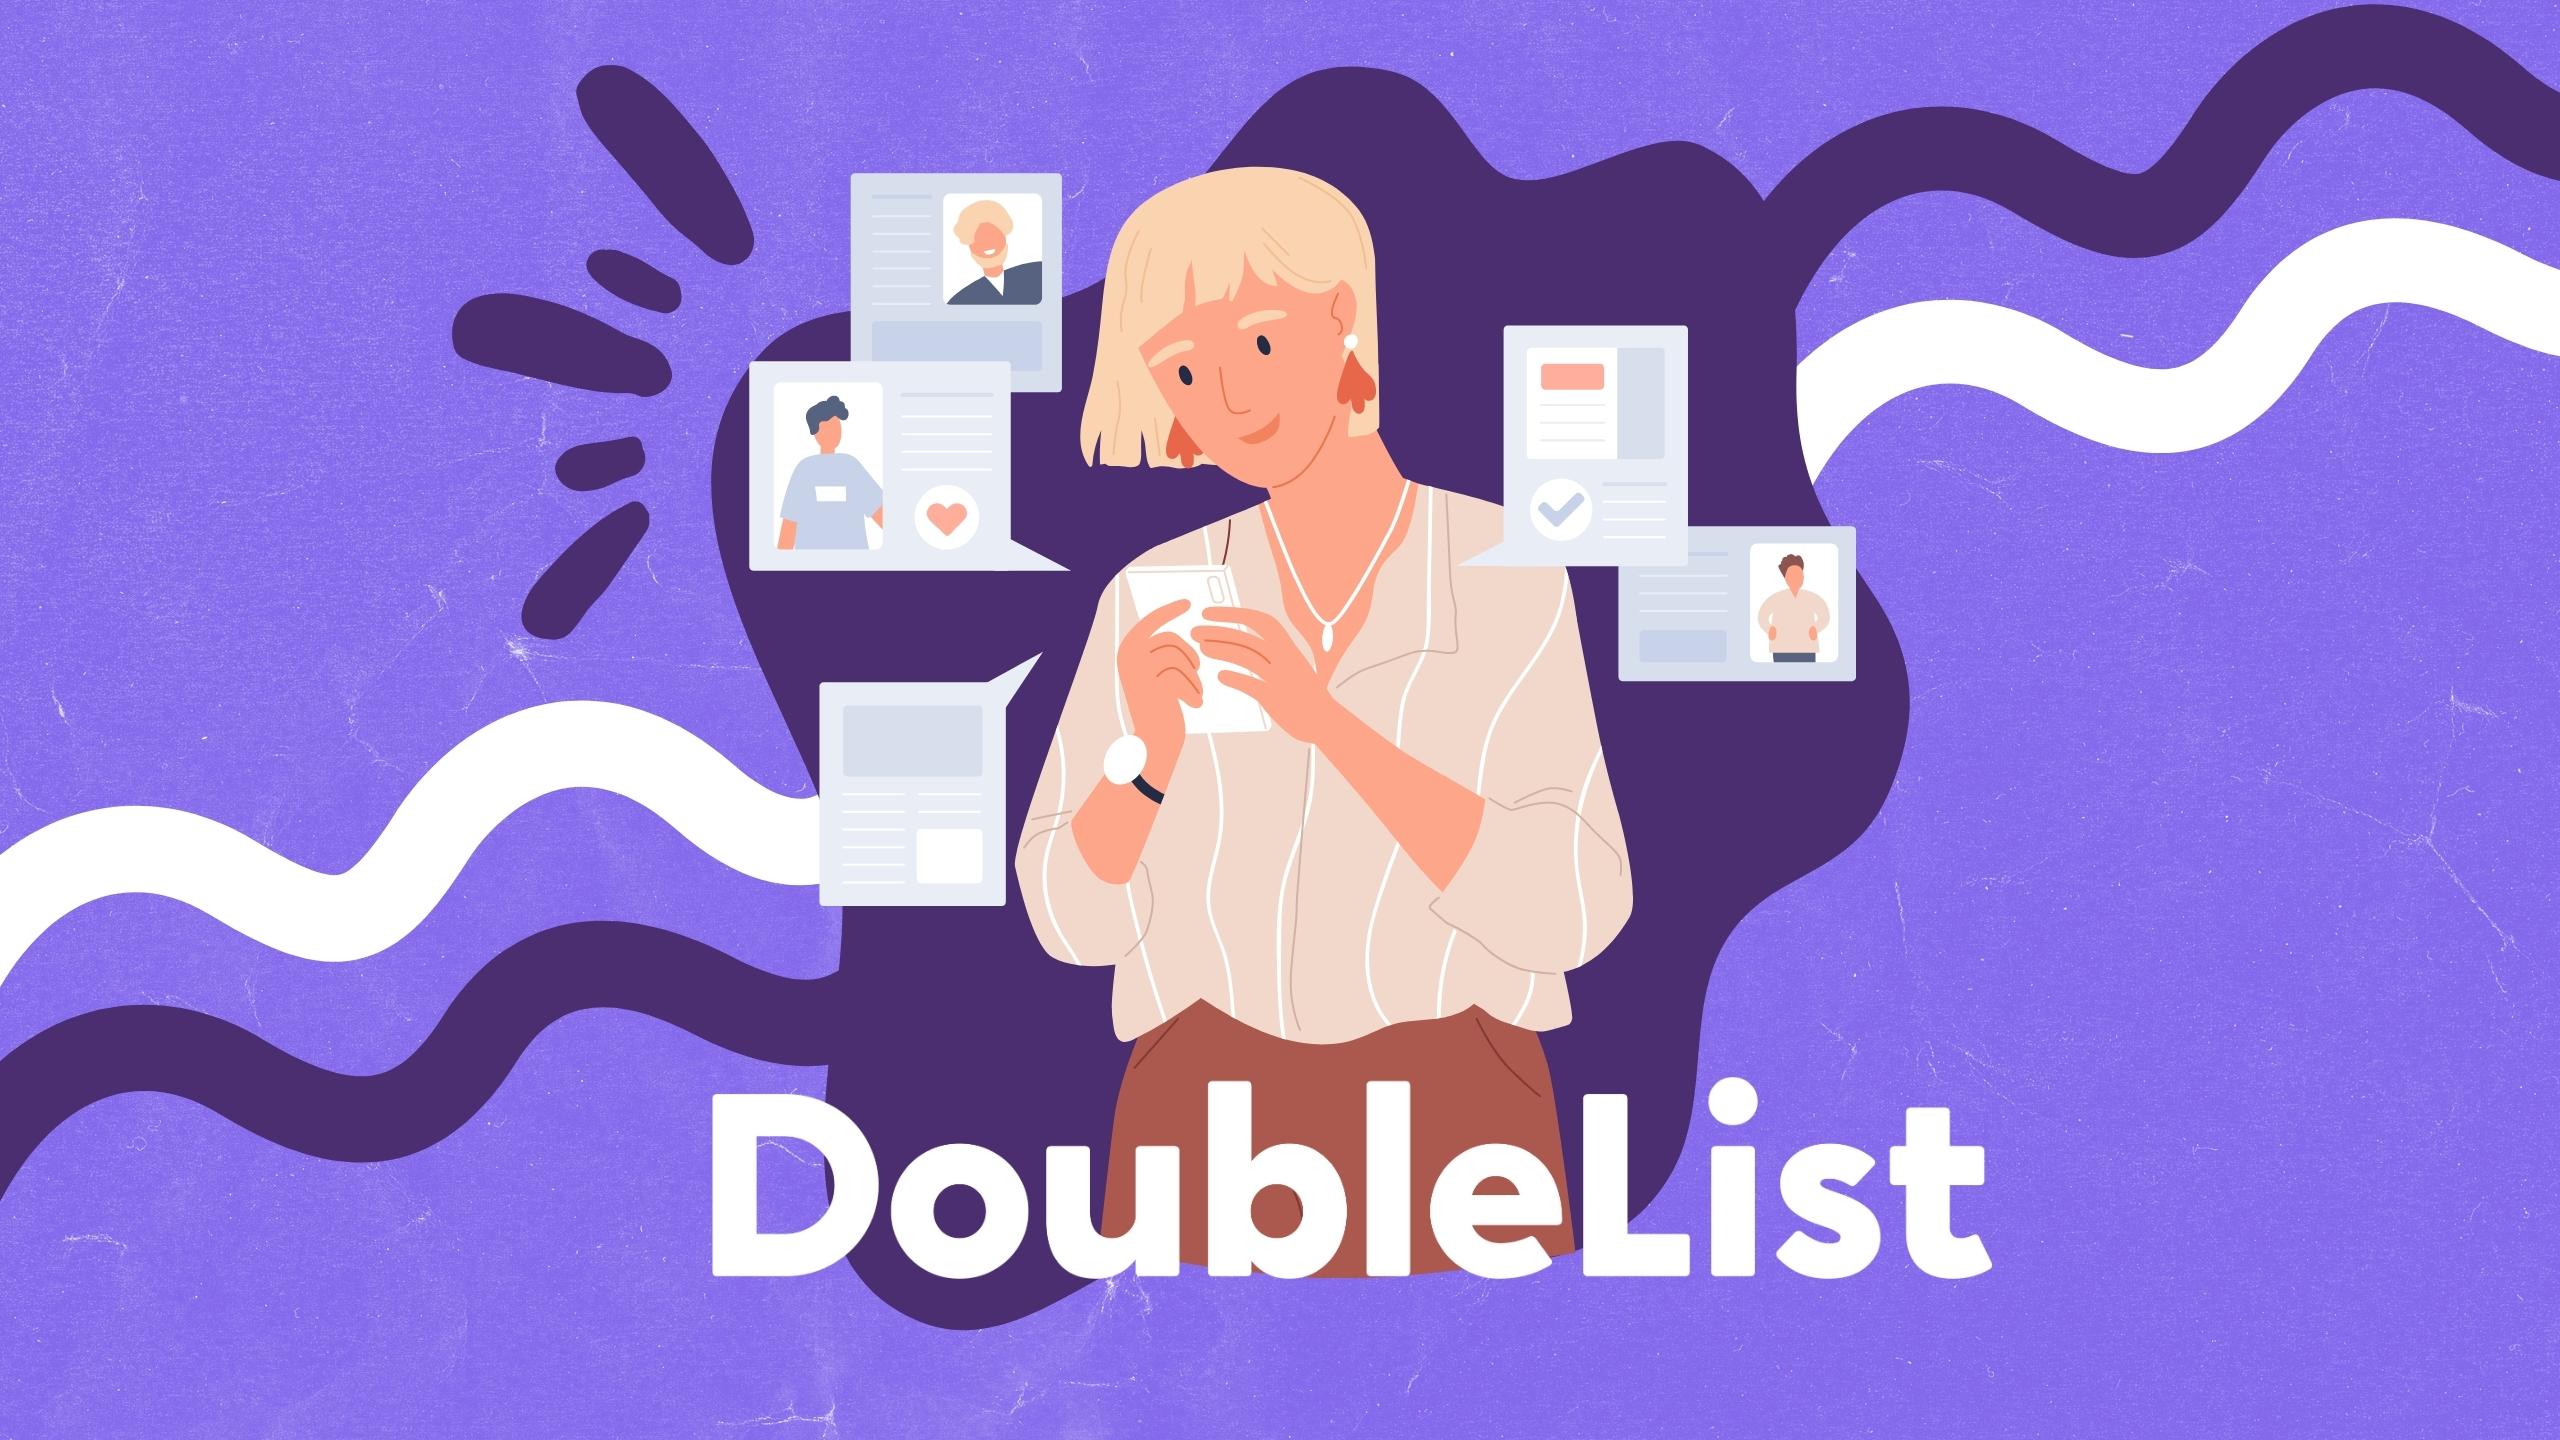 How To Get Unblocked From Doublelist